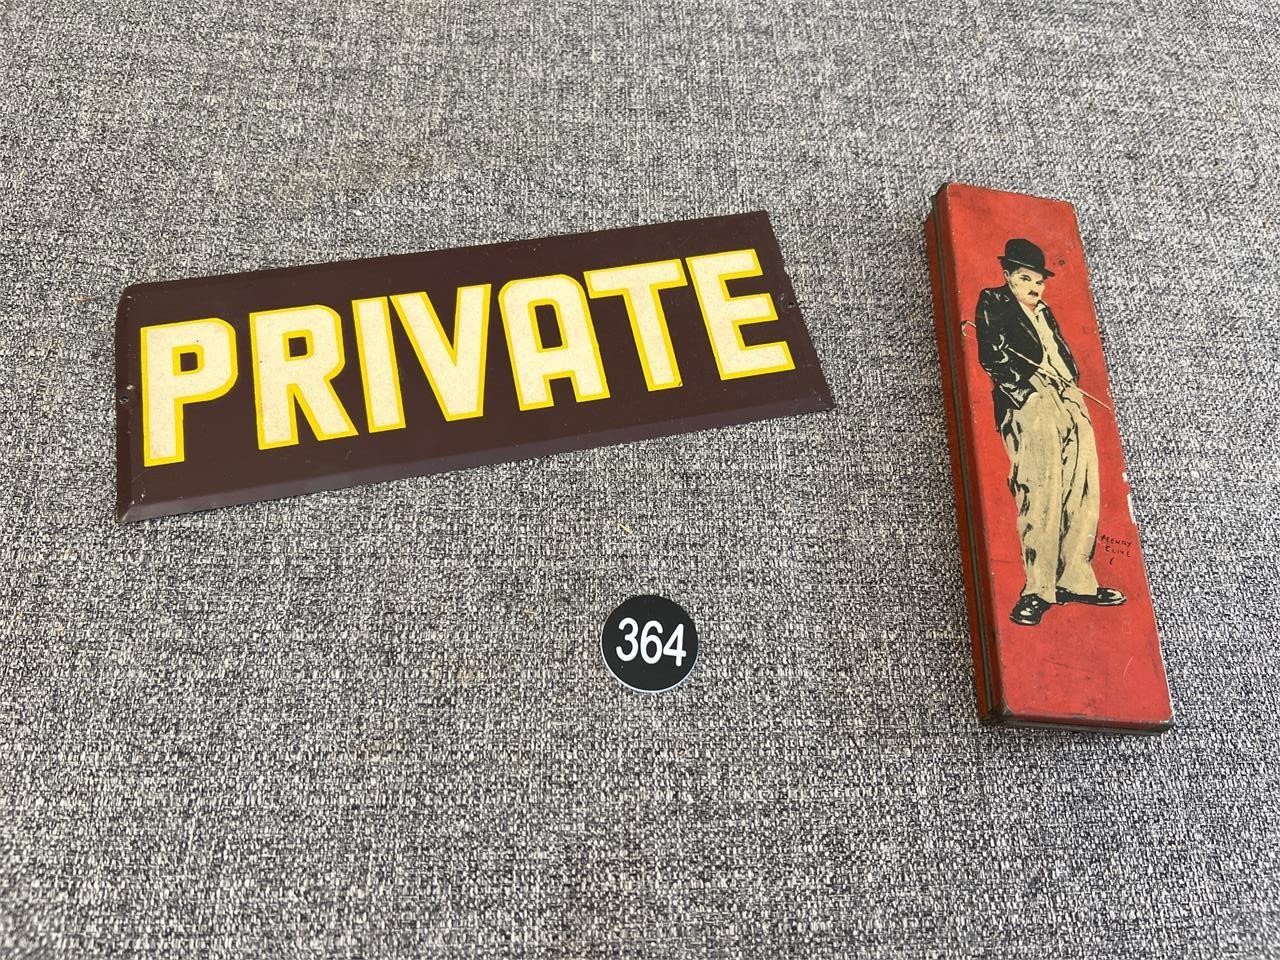 PRIVATE Sign & 1920's Charley Chaplain Pencil Case